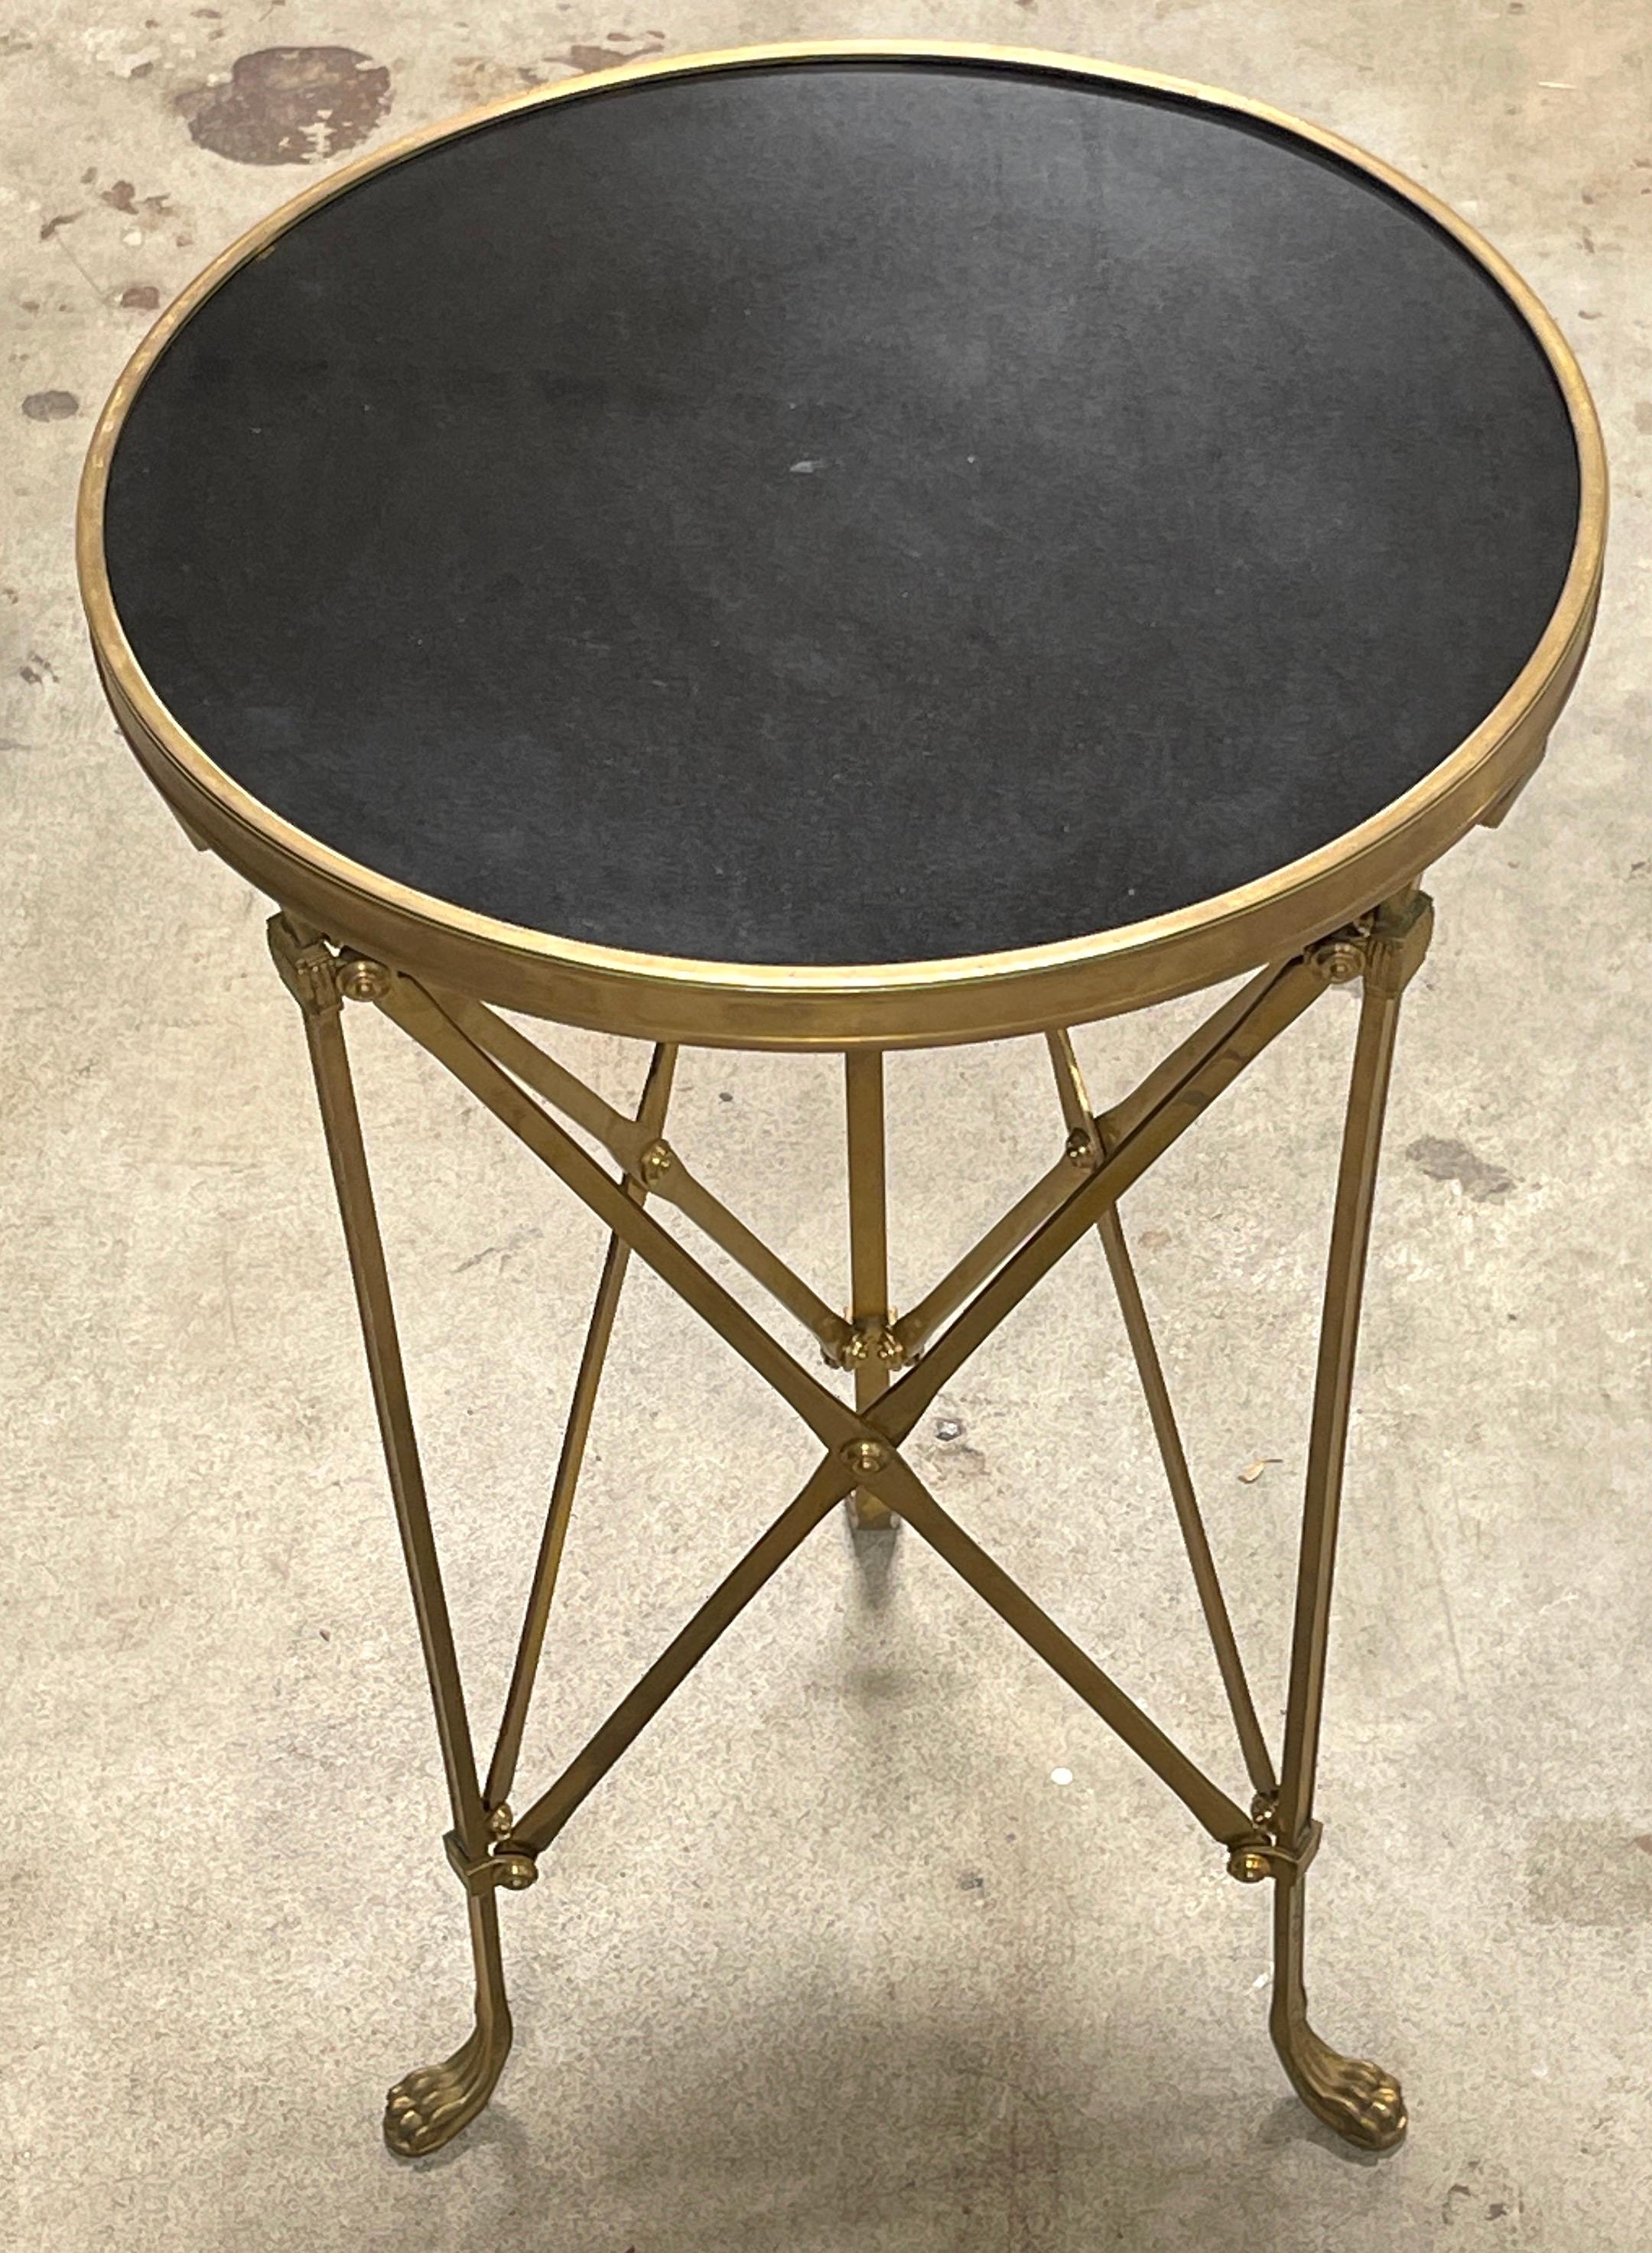 20th Century French Bronze & Marble Neoclassical Gueridon/ Side Table